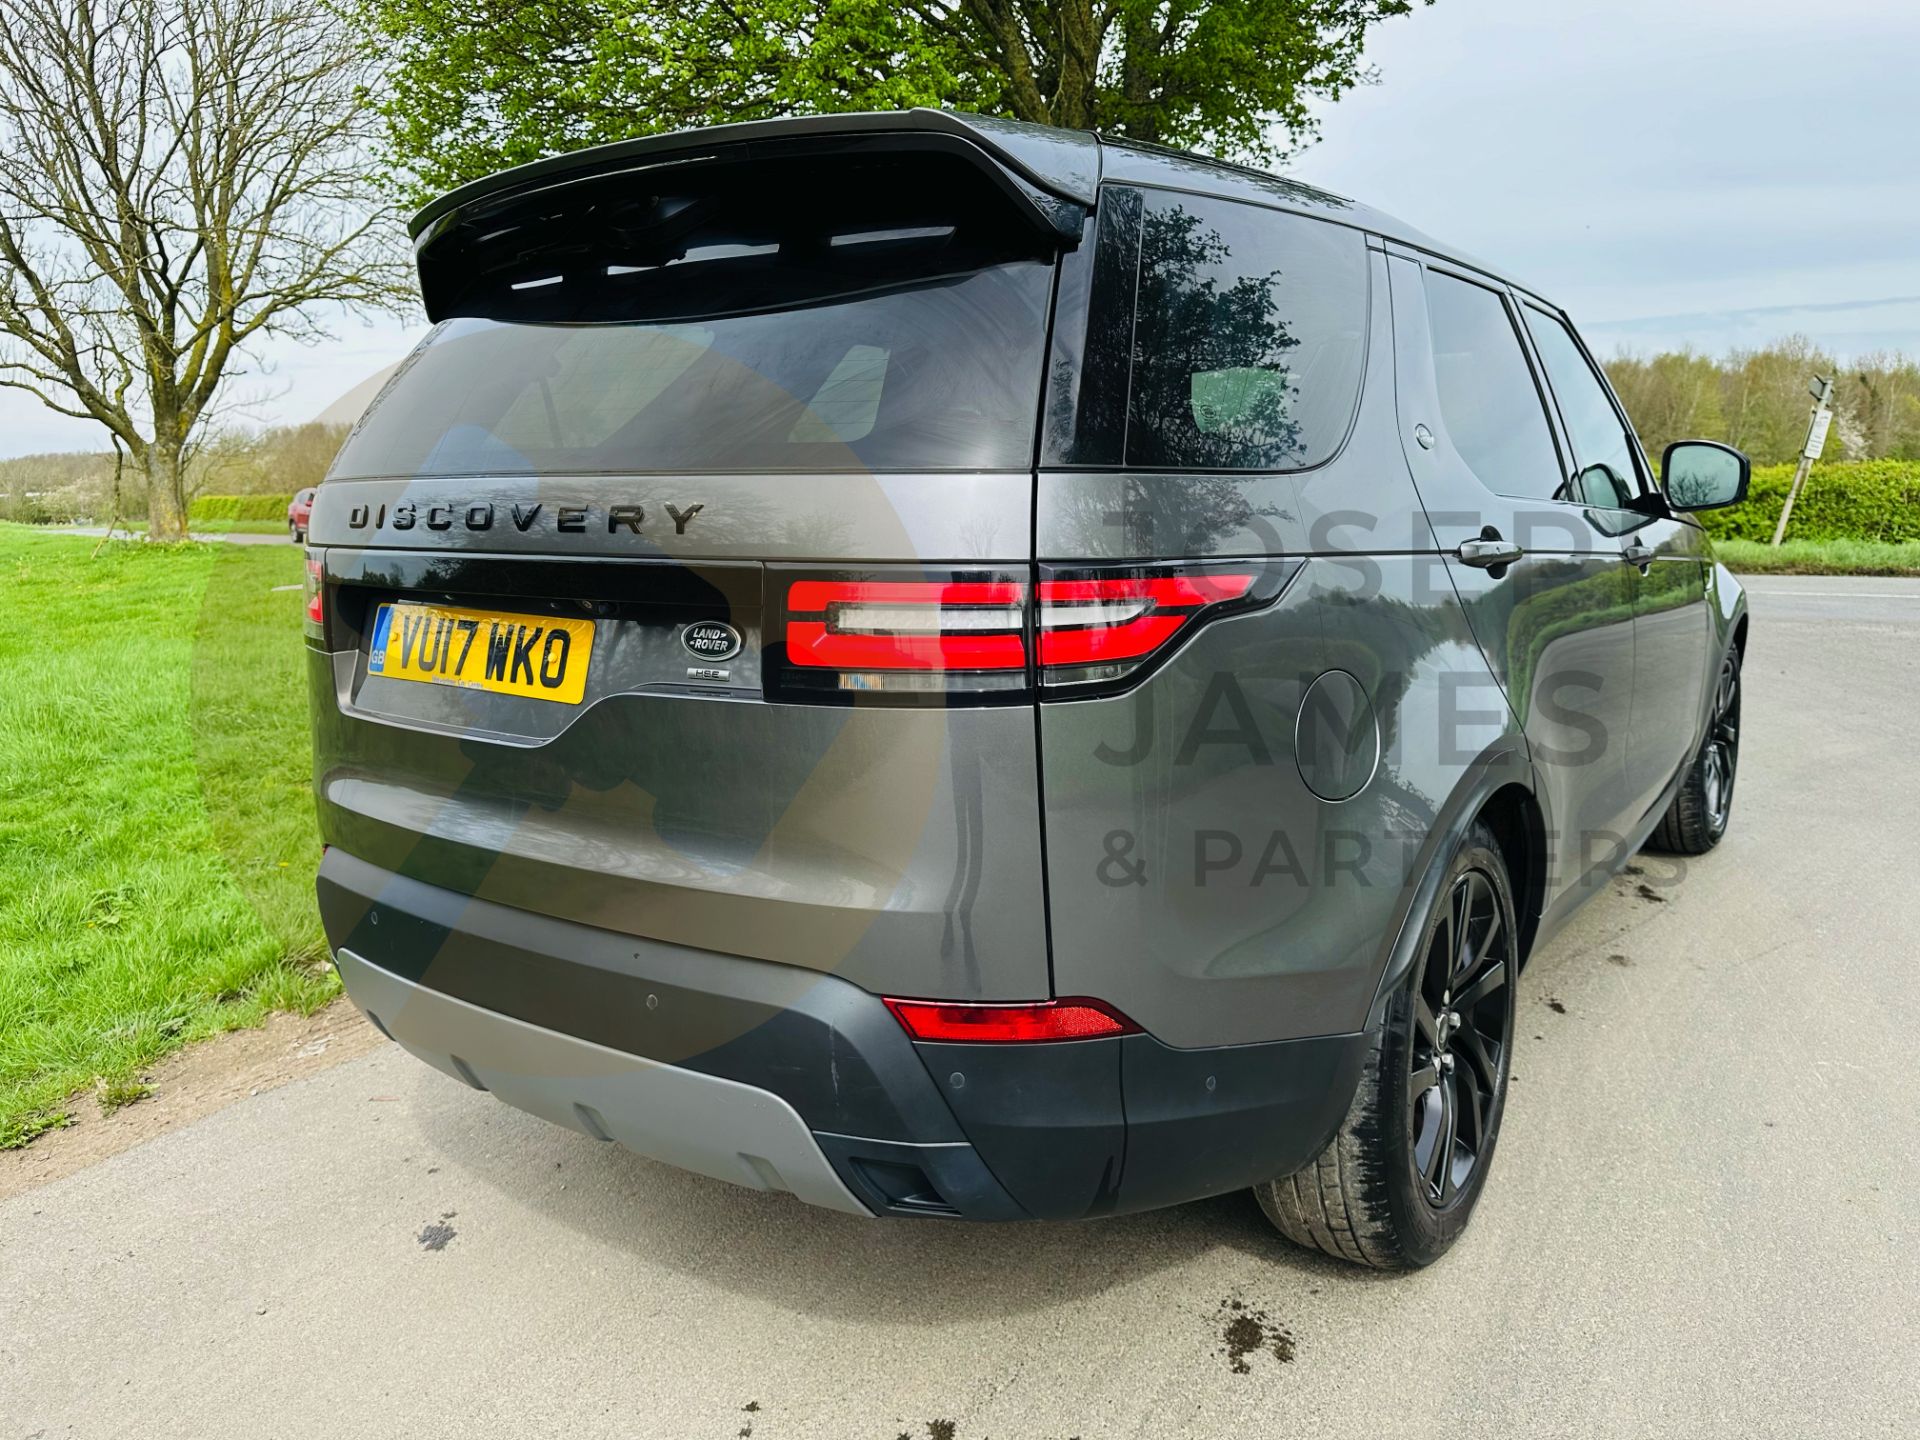 (On Sale) LAND ROVER DISCOVERY *HSE EDITION* AUTOMATIC (2017) 7 SEATER-ONLY 89K MILES - FULLY LOADED - Image 12 of 48